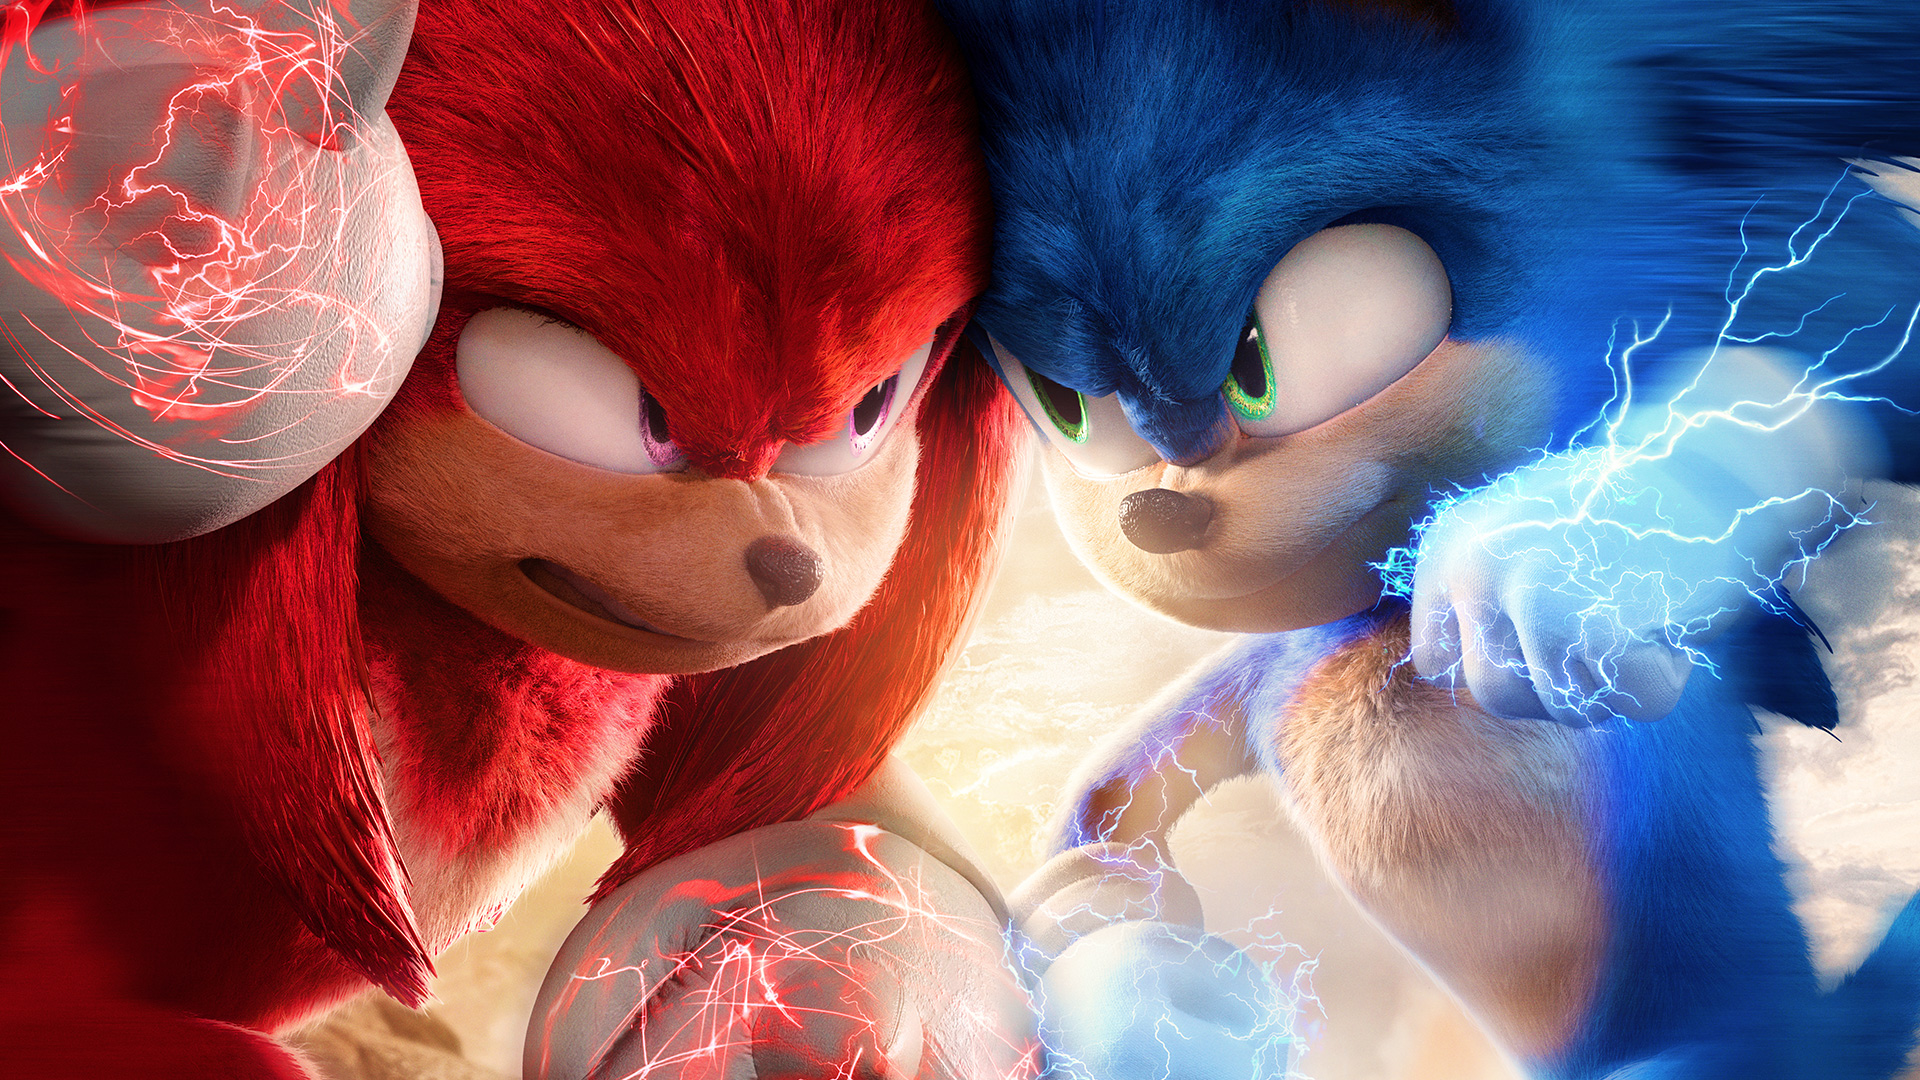 sonic the hedgehog 2, sonic, knuckles the echidna, movie, sonic the hedgehog